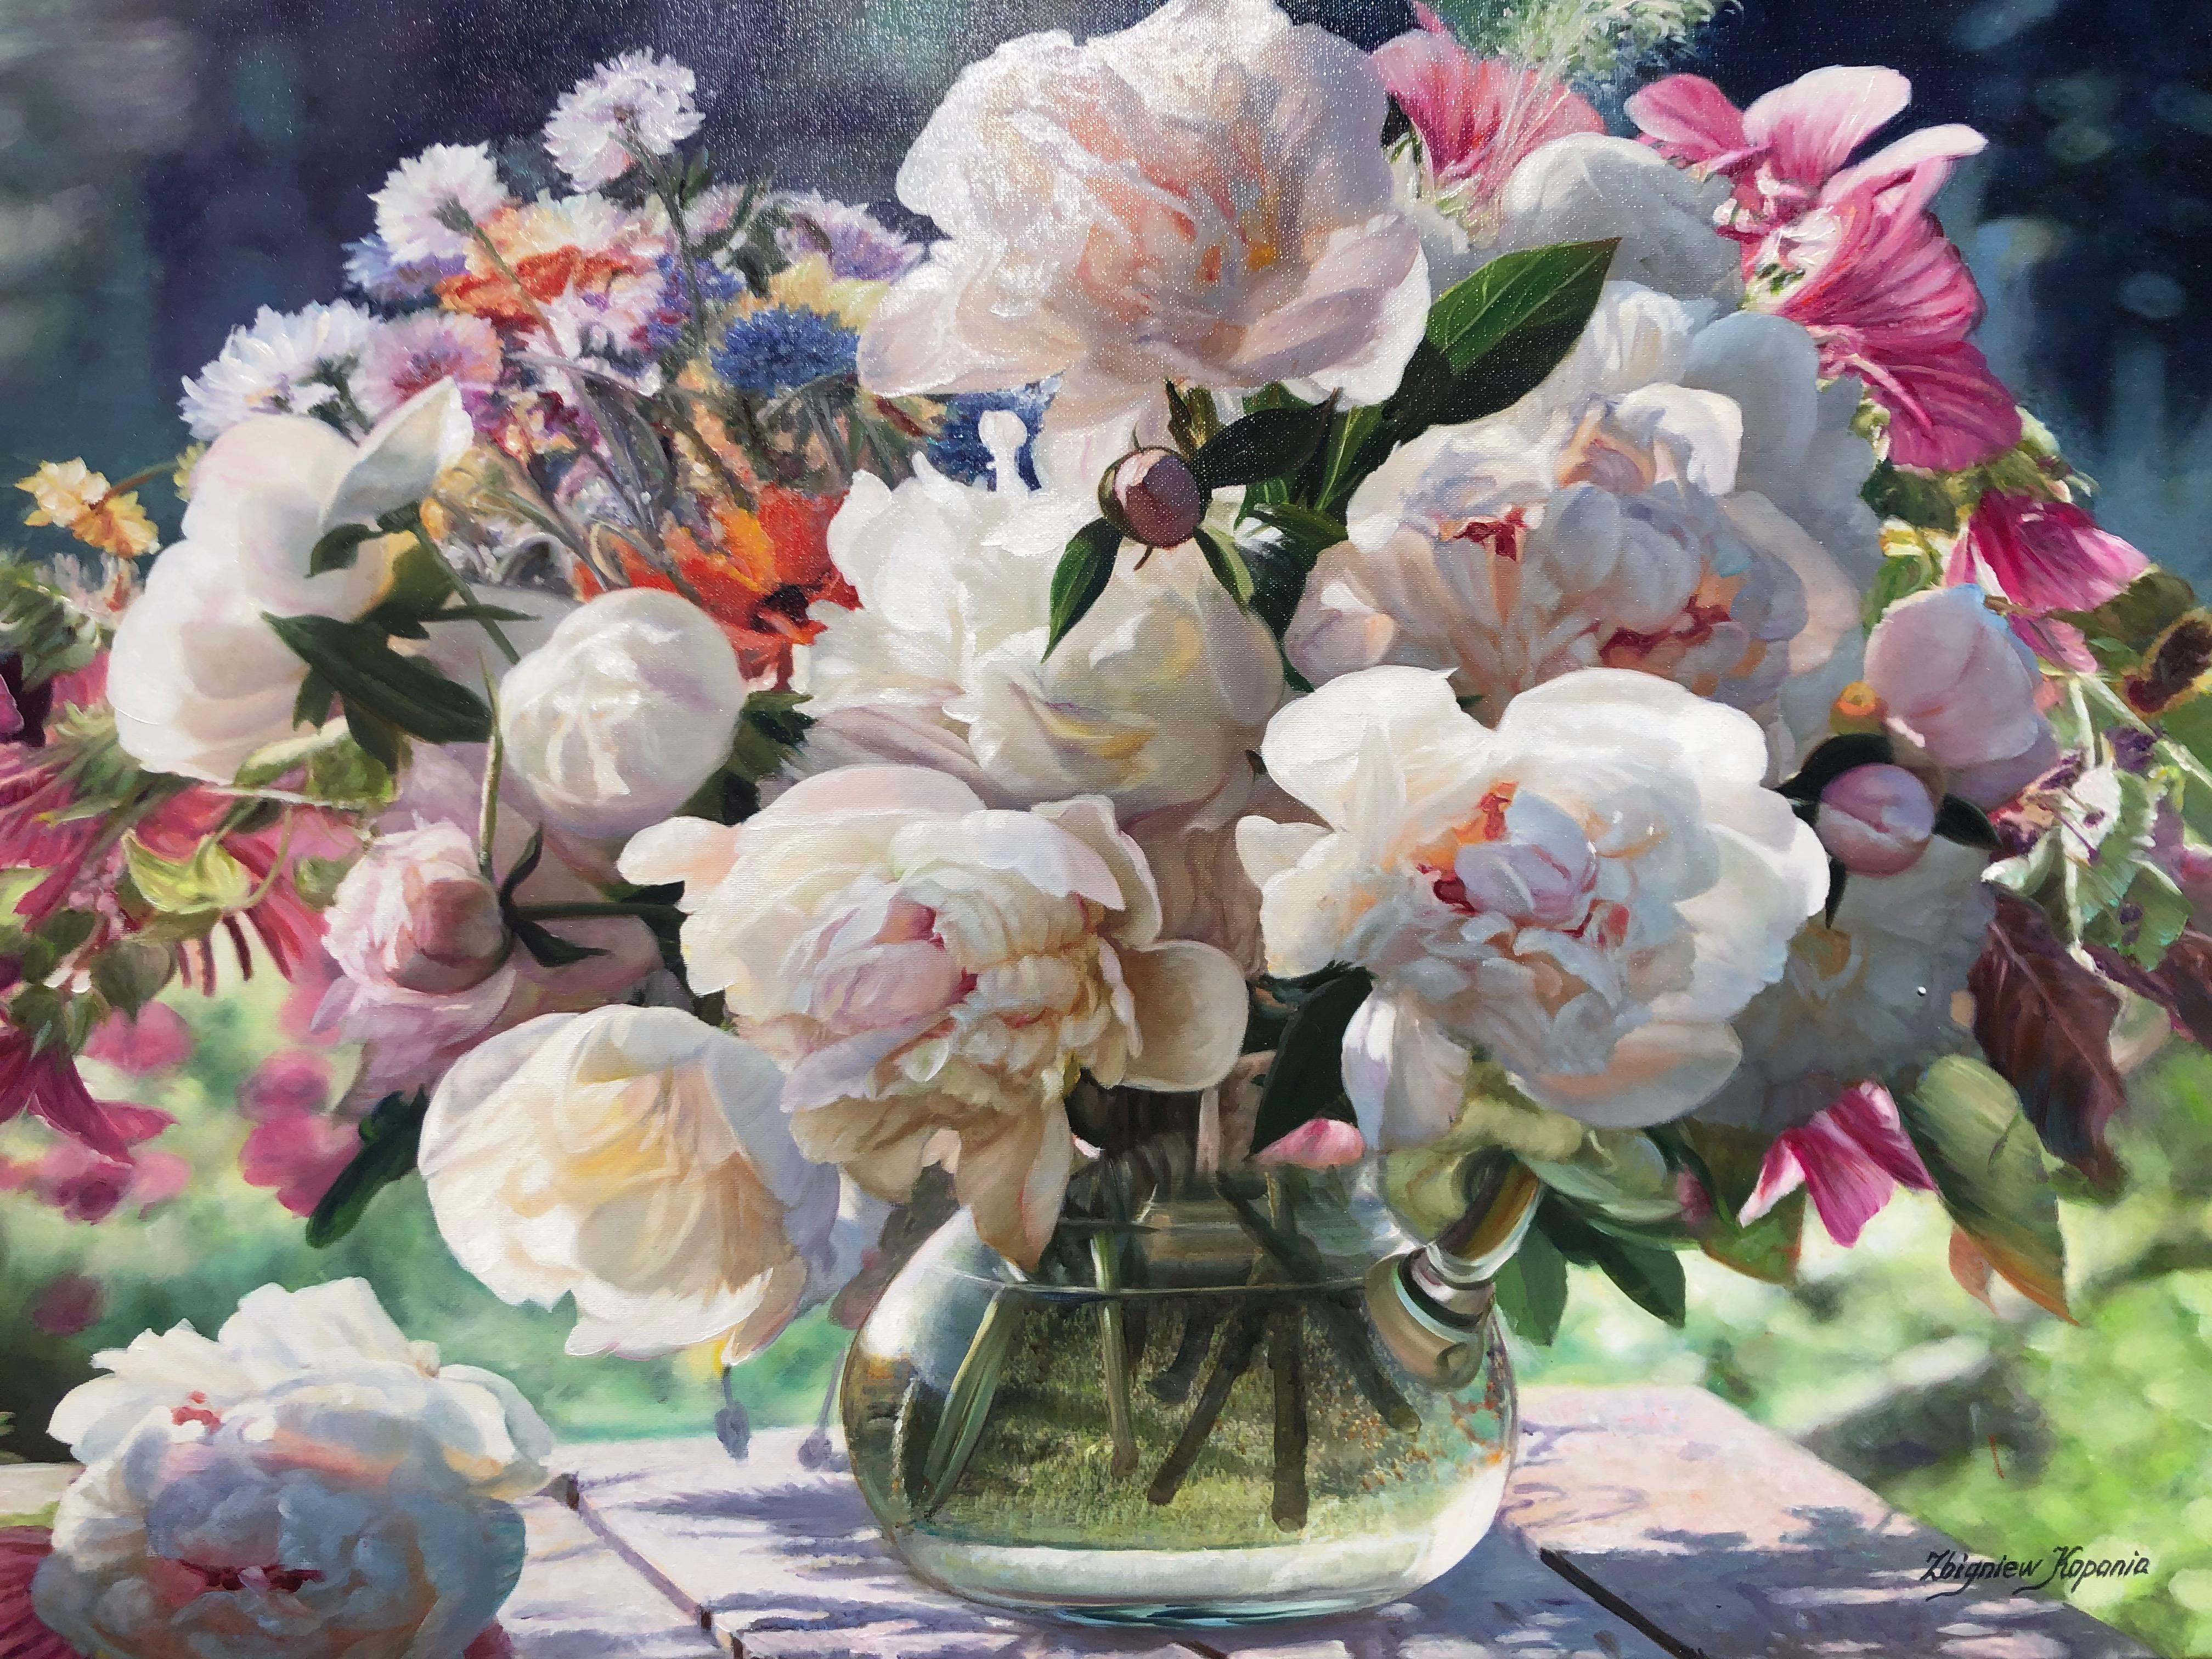 Summer Bouquet 2022
Still Life oil on canvas, artist signed lower right framed.
Zbigniew Kopania, artist painter, cinematographer, born December 21, 1949, in Łódź Poland.
Kopania style of paintings characterized by very high realism, some of them